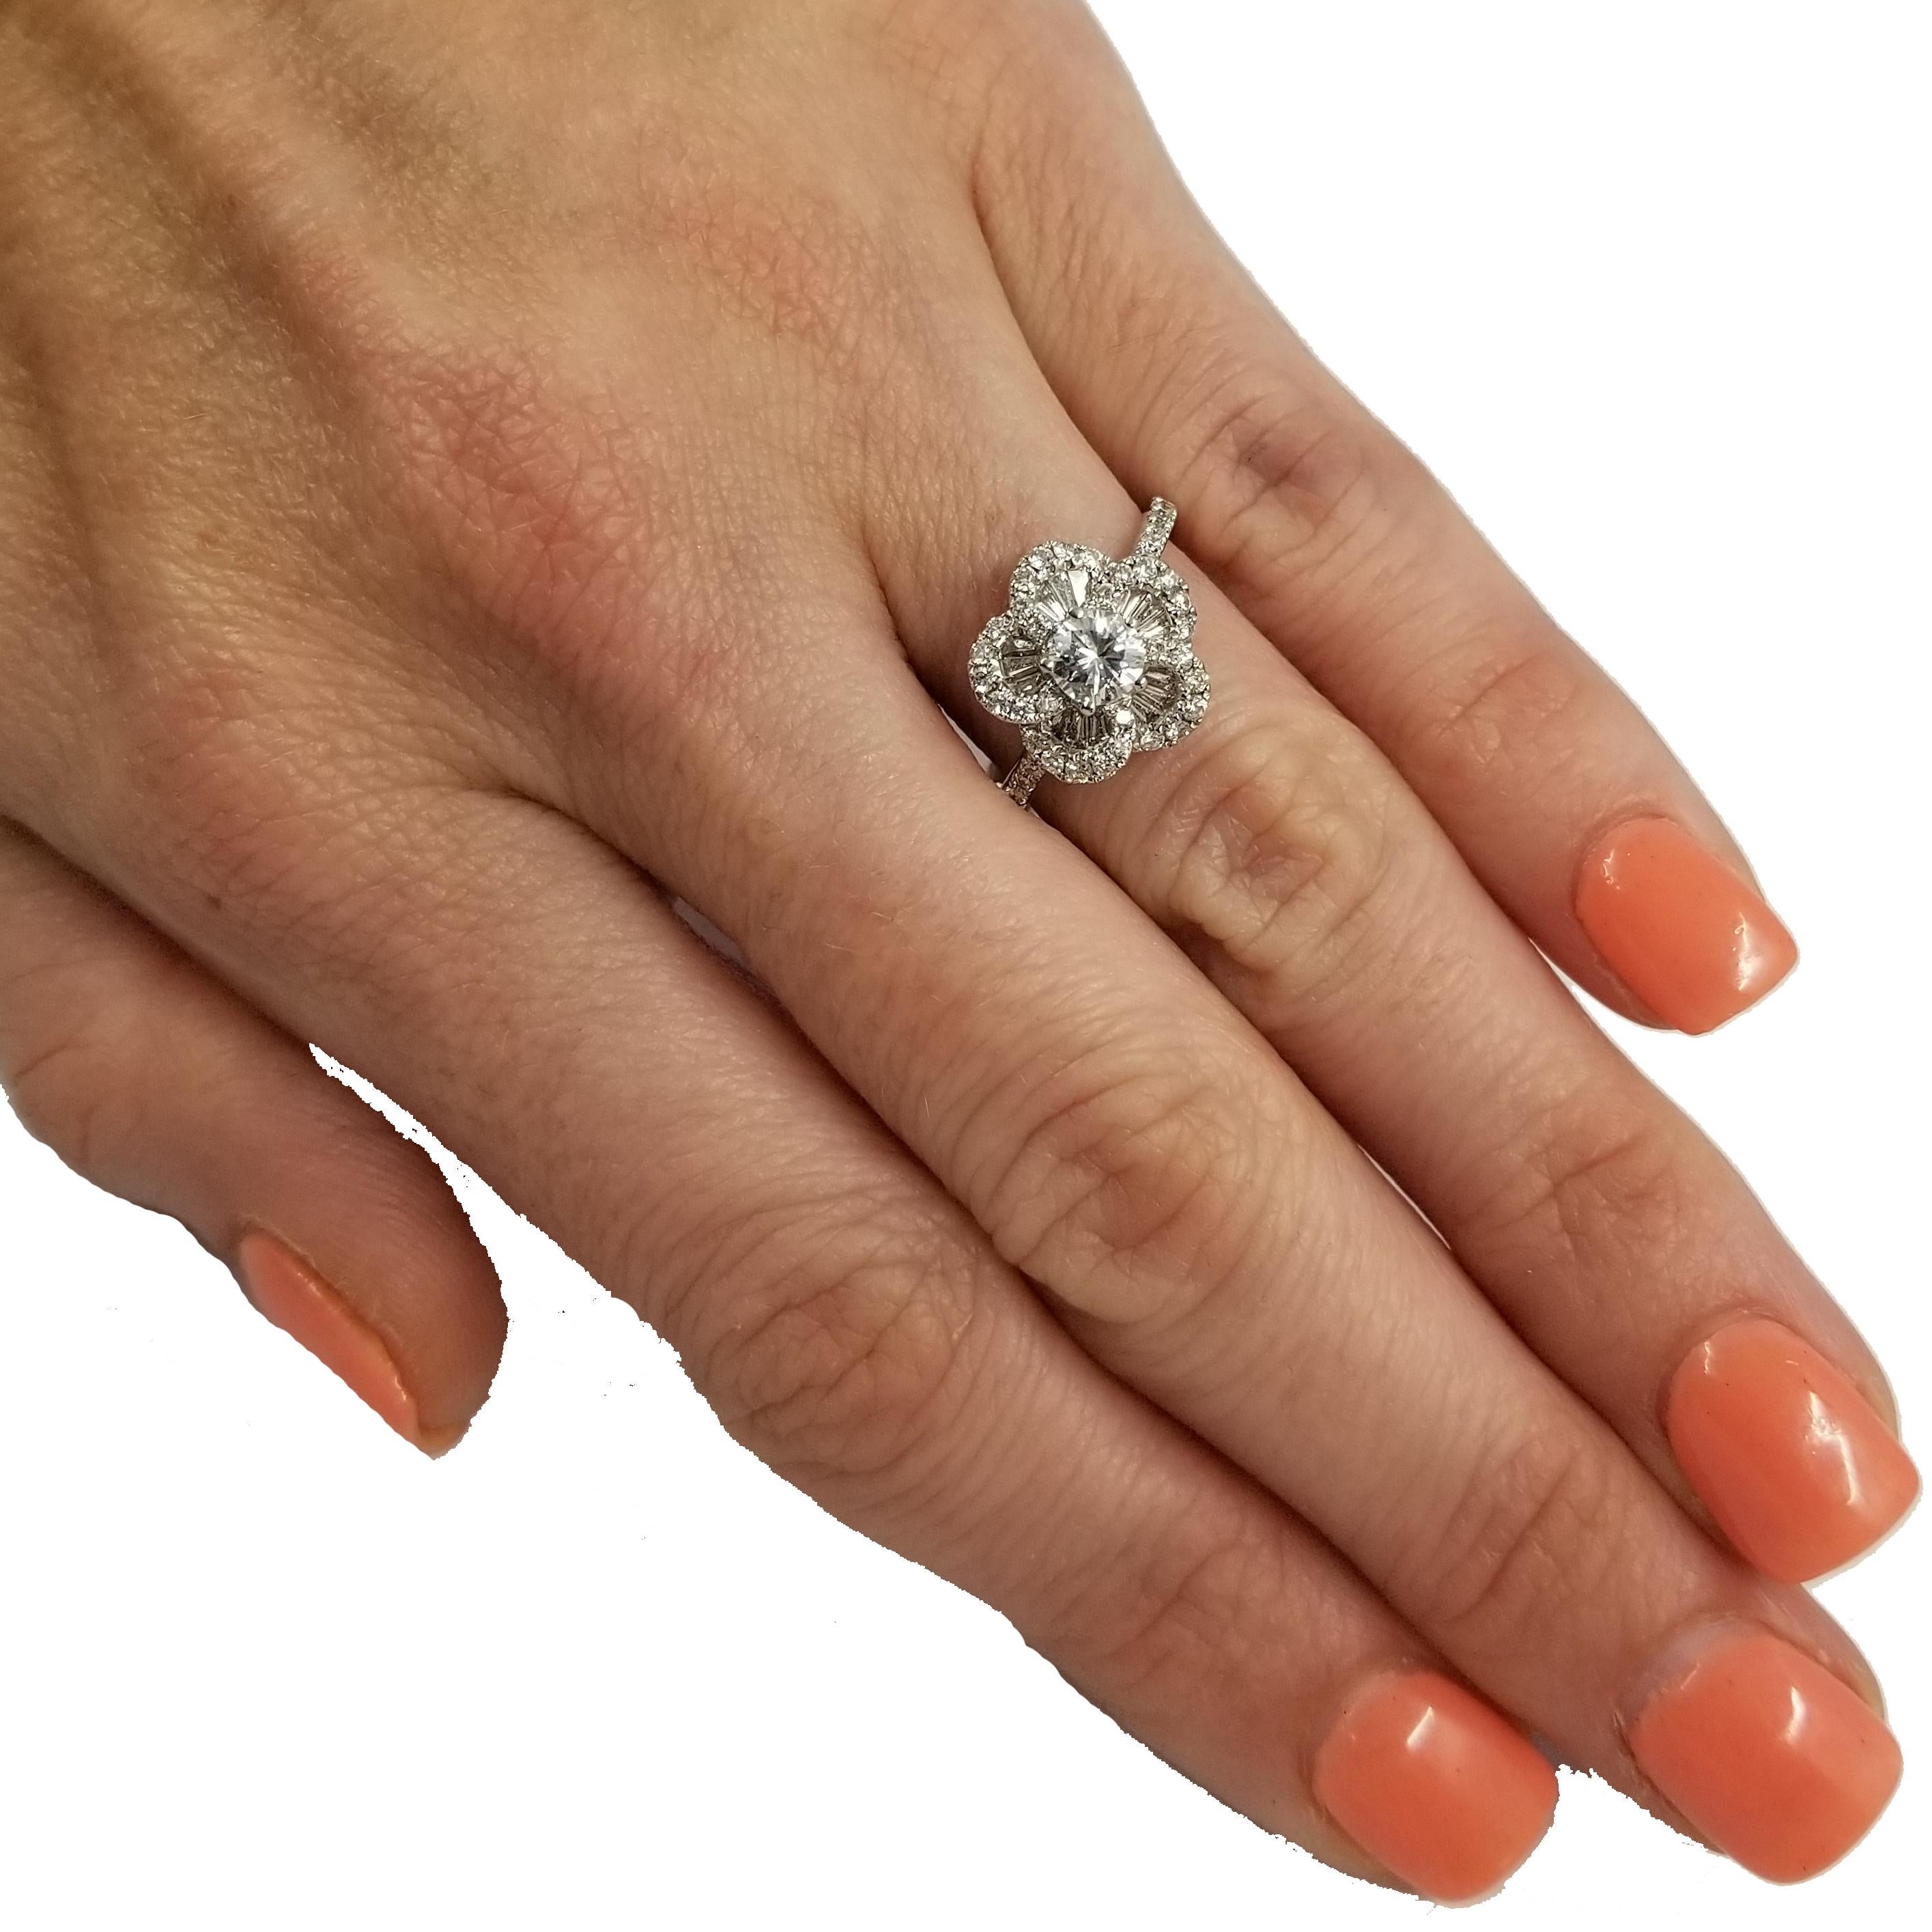 18 Karat White Gold Flower Ring Featuring a 0.37 Carat Round Center Diamond of VS1 Clarity & G Color. It is Surrounded by 15 Baguette Cut Diamonds Totaling 0.25 Carats, and 42 Round Diamond Totaling 0.38 Carats, Both of VS Clarity & G Color.